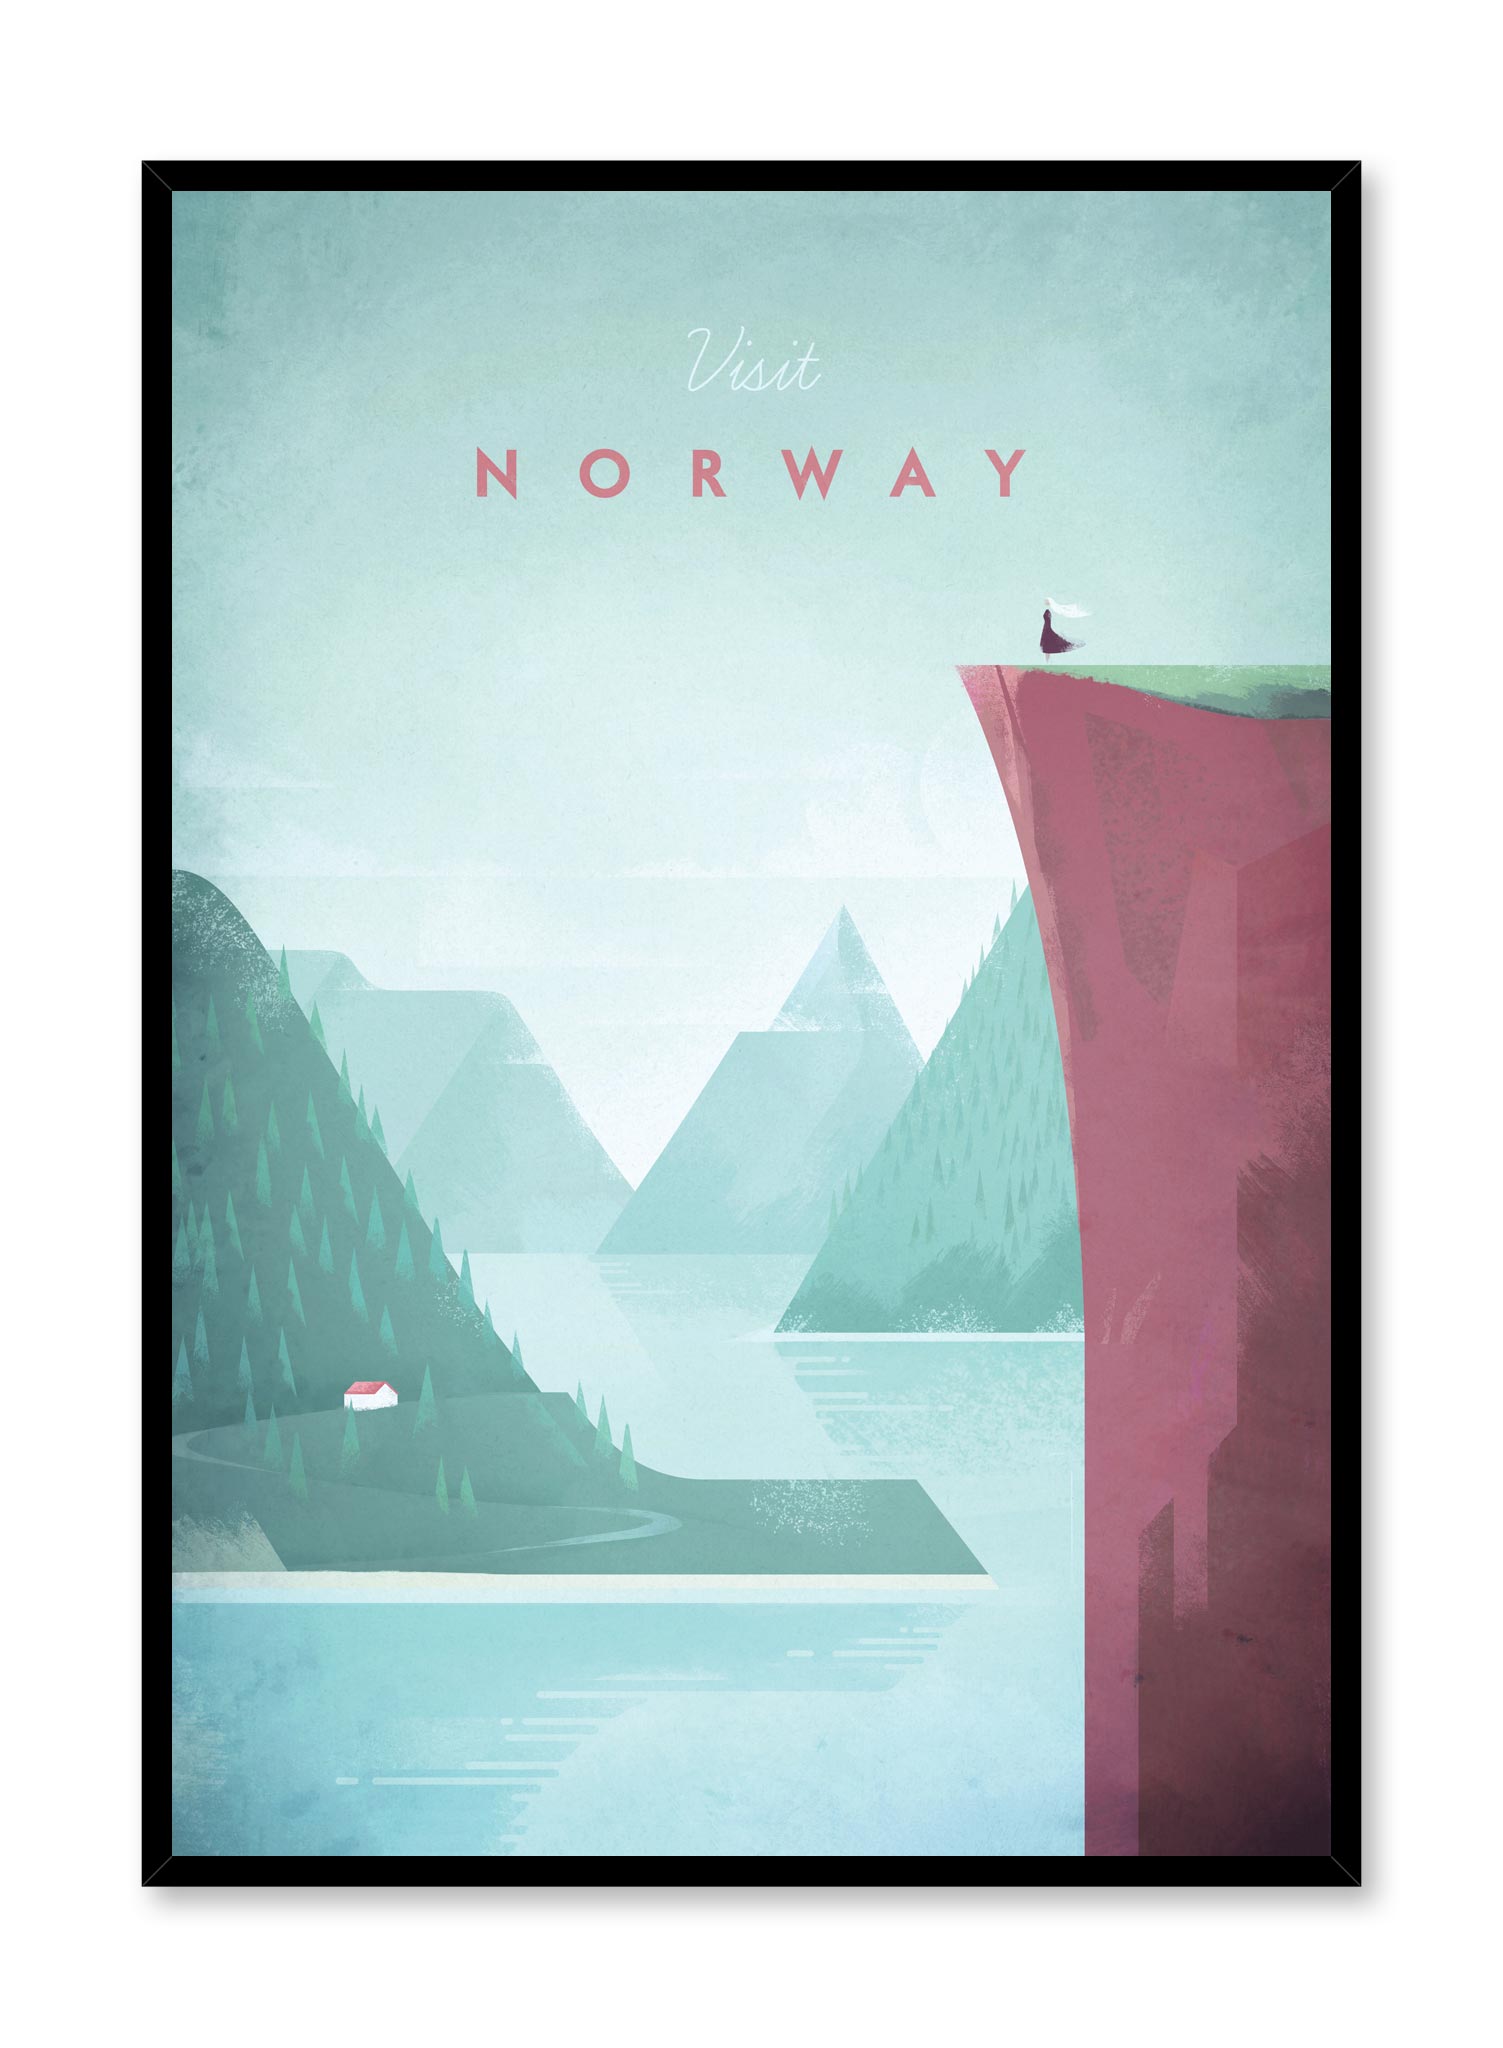 Modern minimalist travel poster by Opposite Wall with illustration of Norway